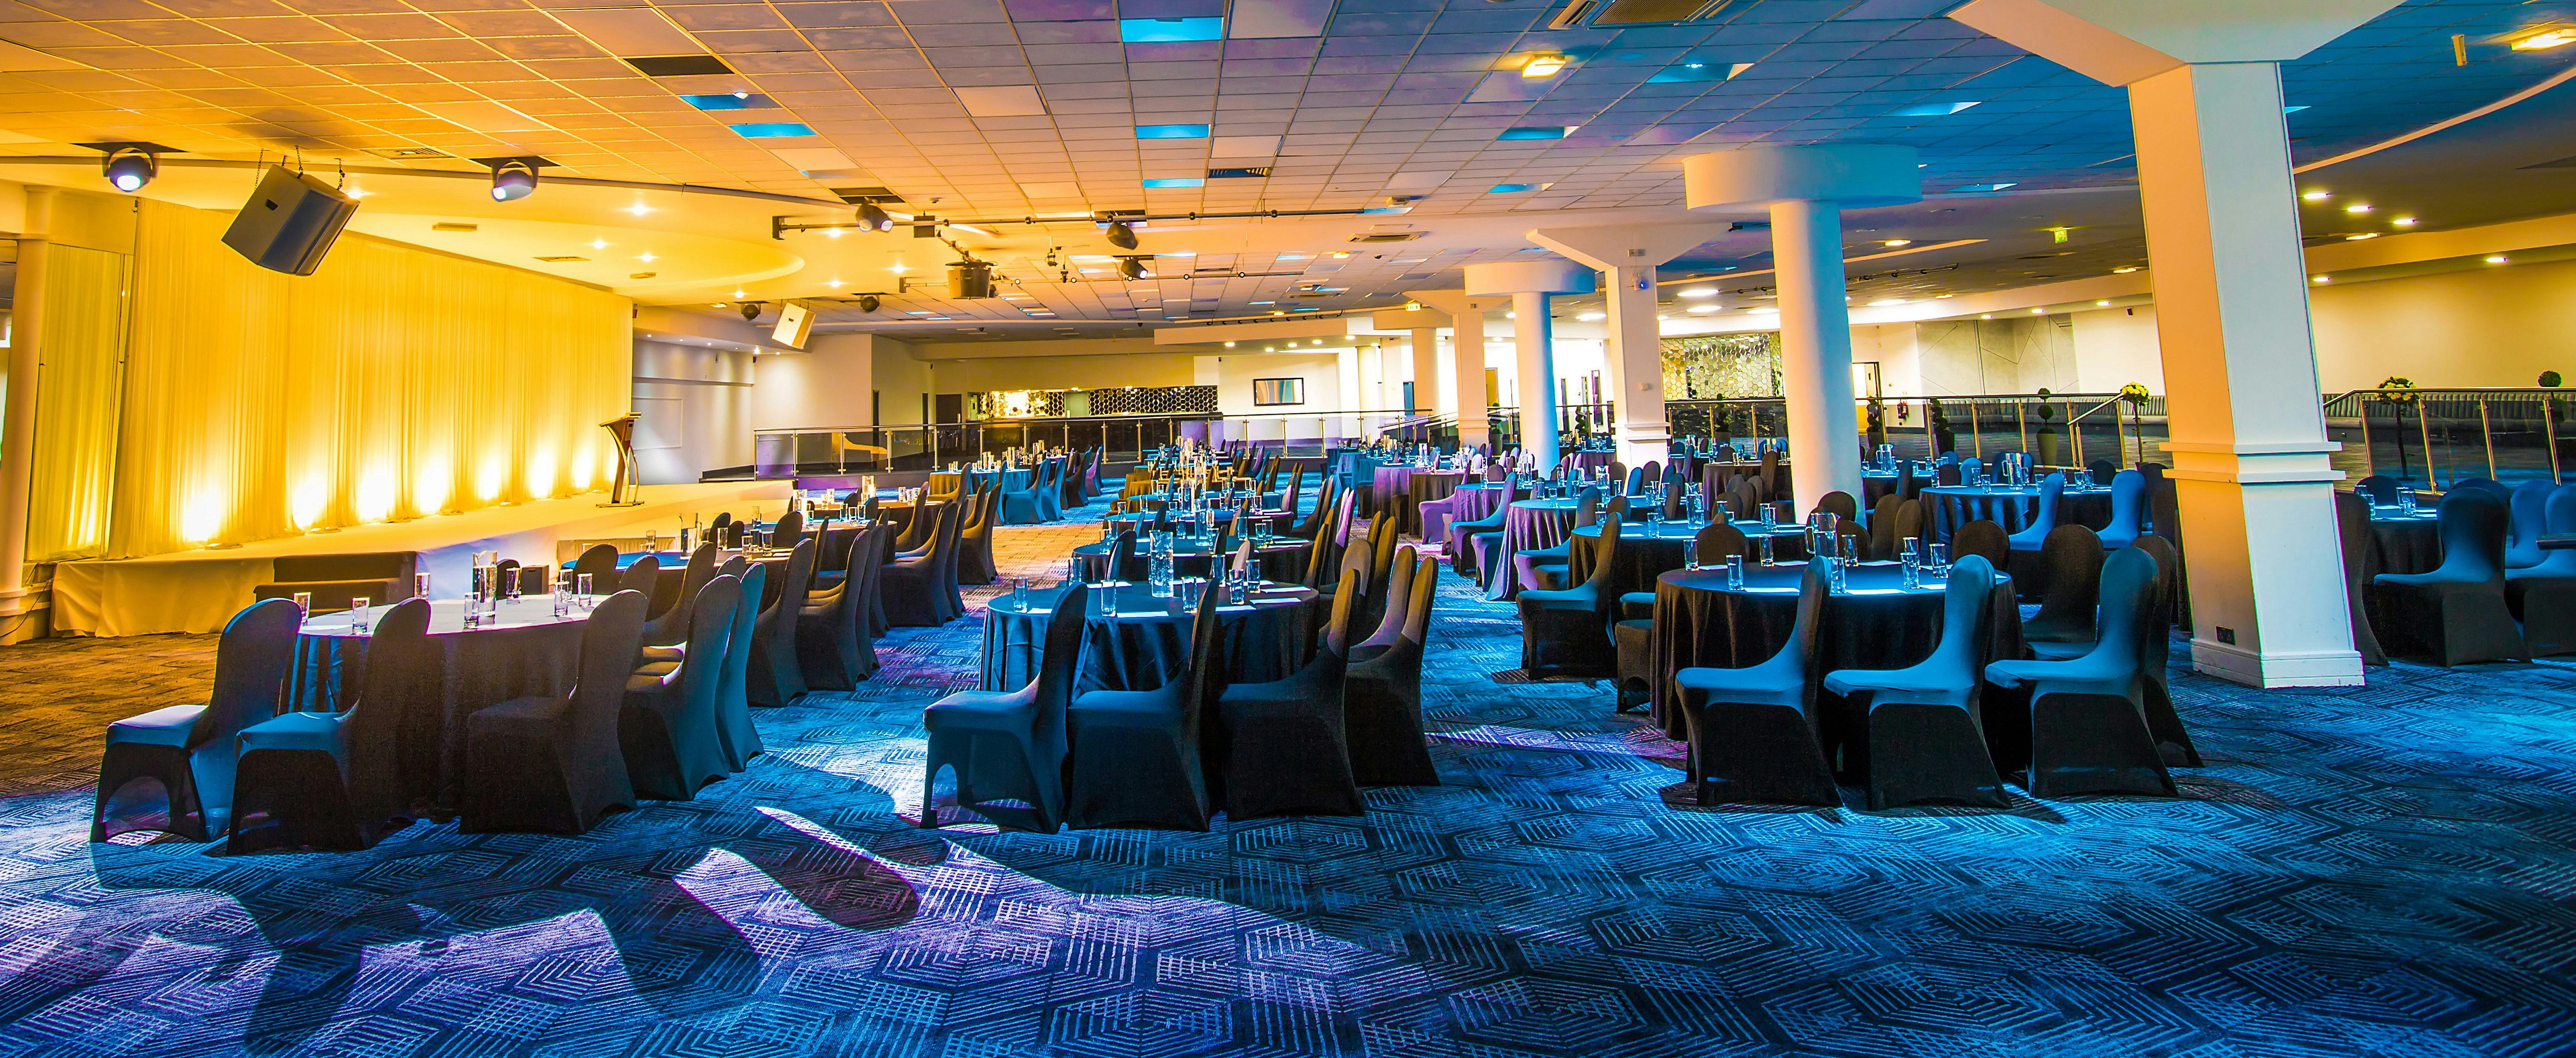 Bar Mitzvah Venues in Manchester - The Sheridan